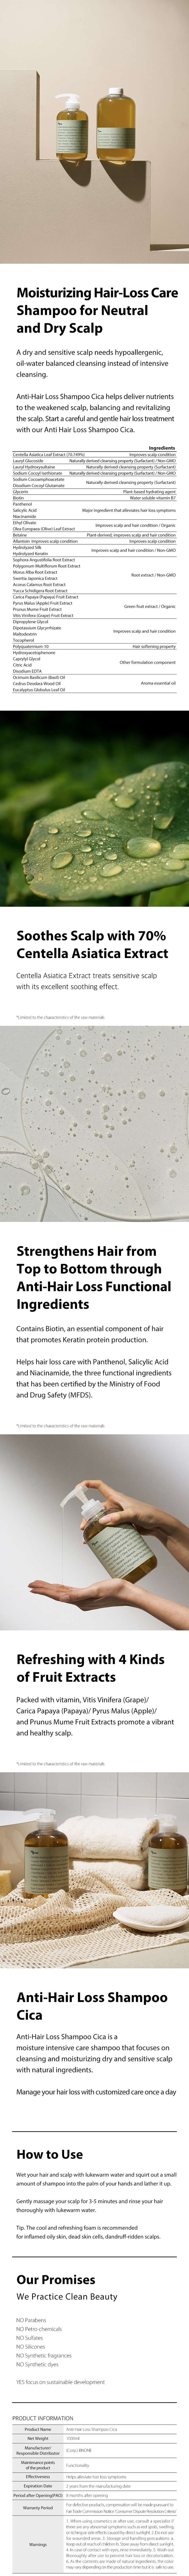 soothes scalp / strengthens hair / anti-hair loss function